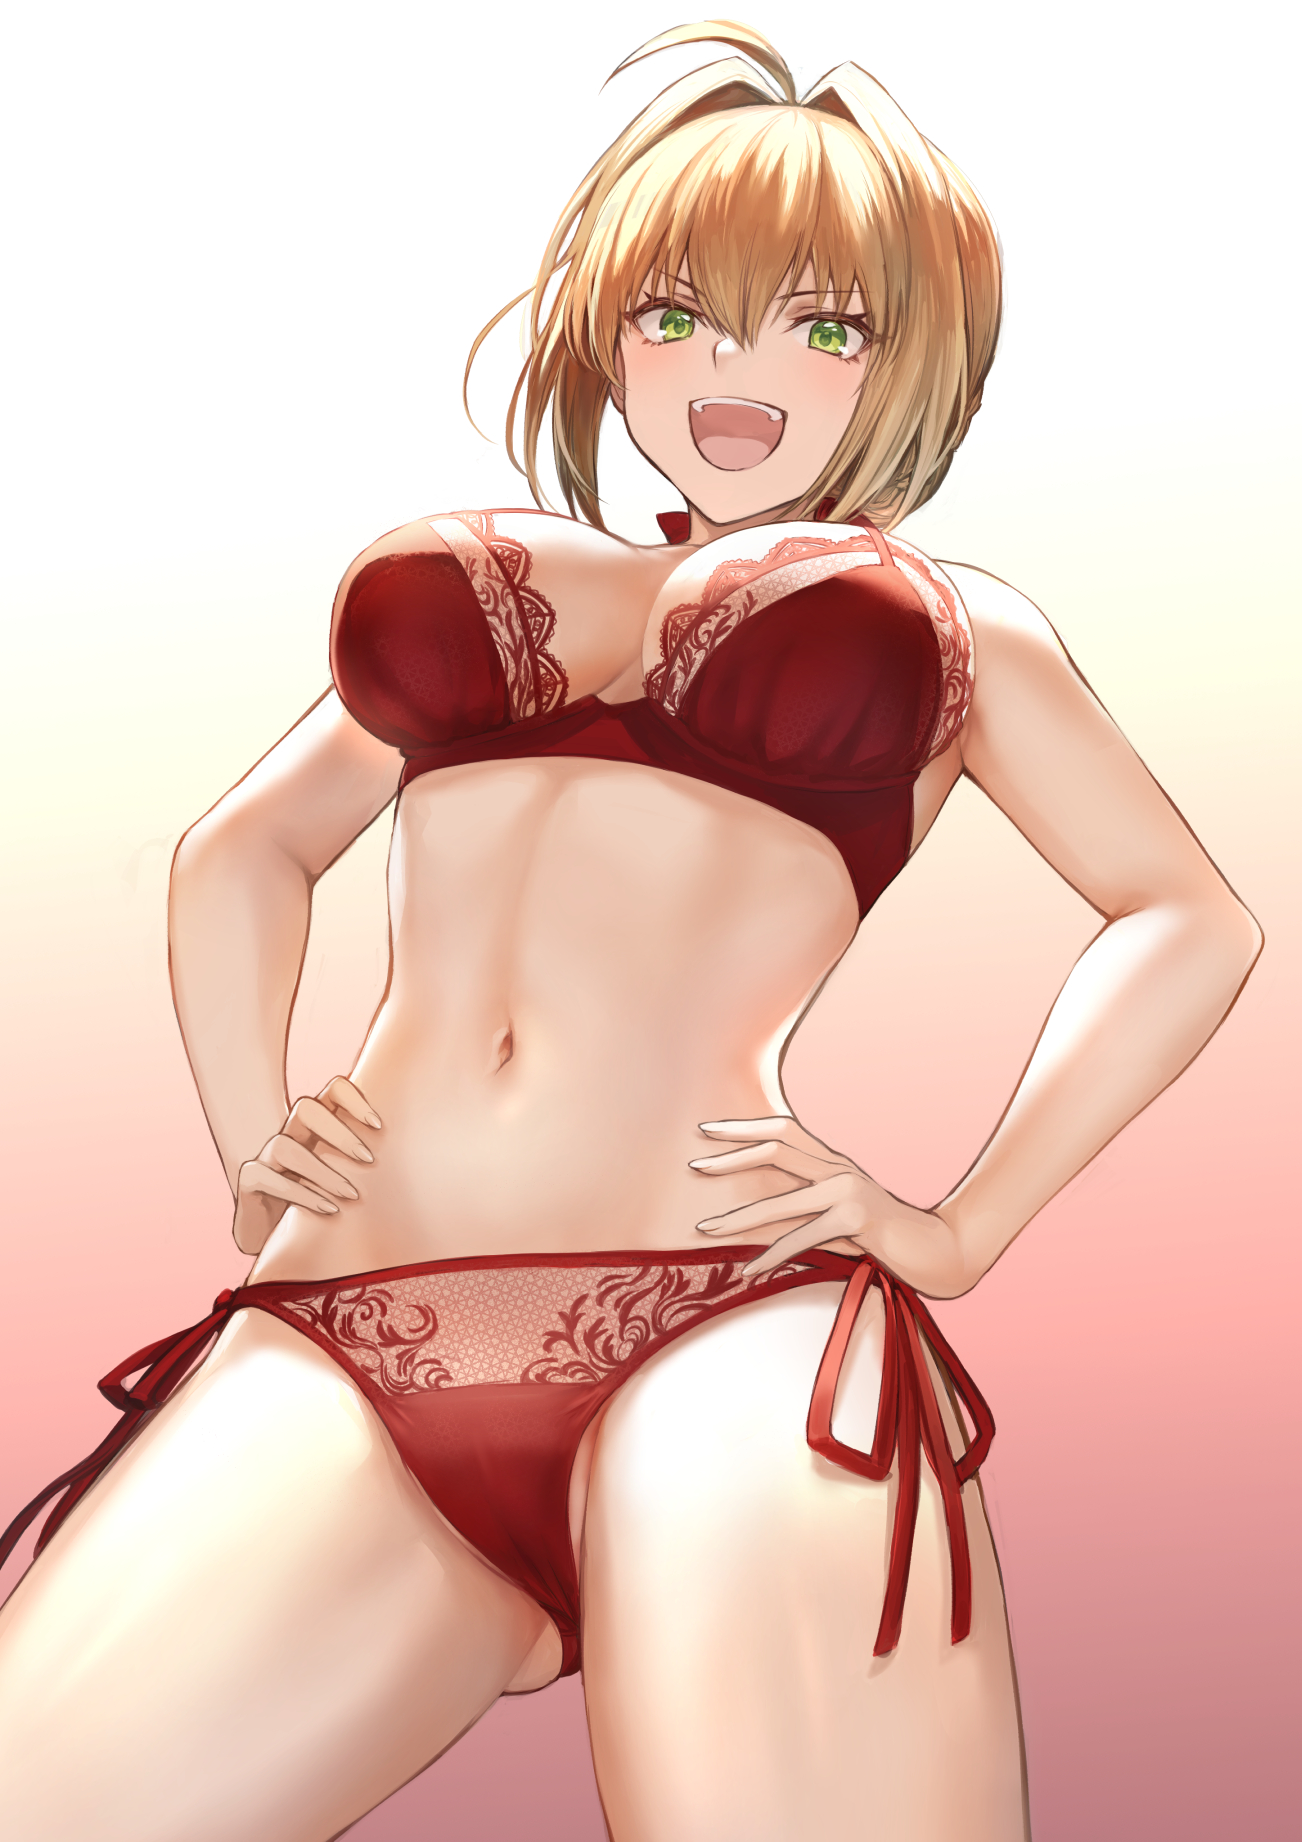 Anime 1302x1842 anime anime girls digital art artwork portrait display boobs big boobs 2D open mouth laughing green eyes blonde panties bra low-angle Nero Claudius Fate series Fate/Extra underwear lingerie Mashu 003